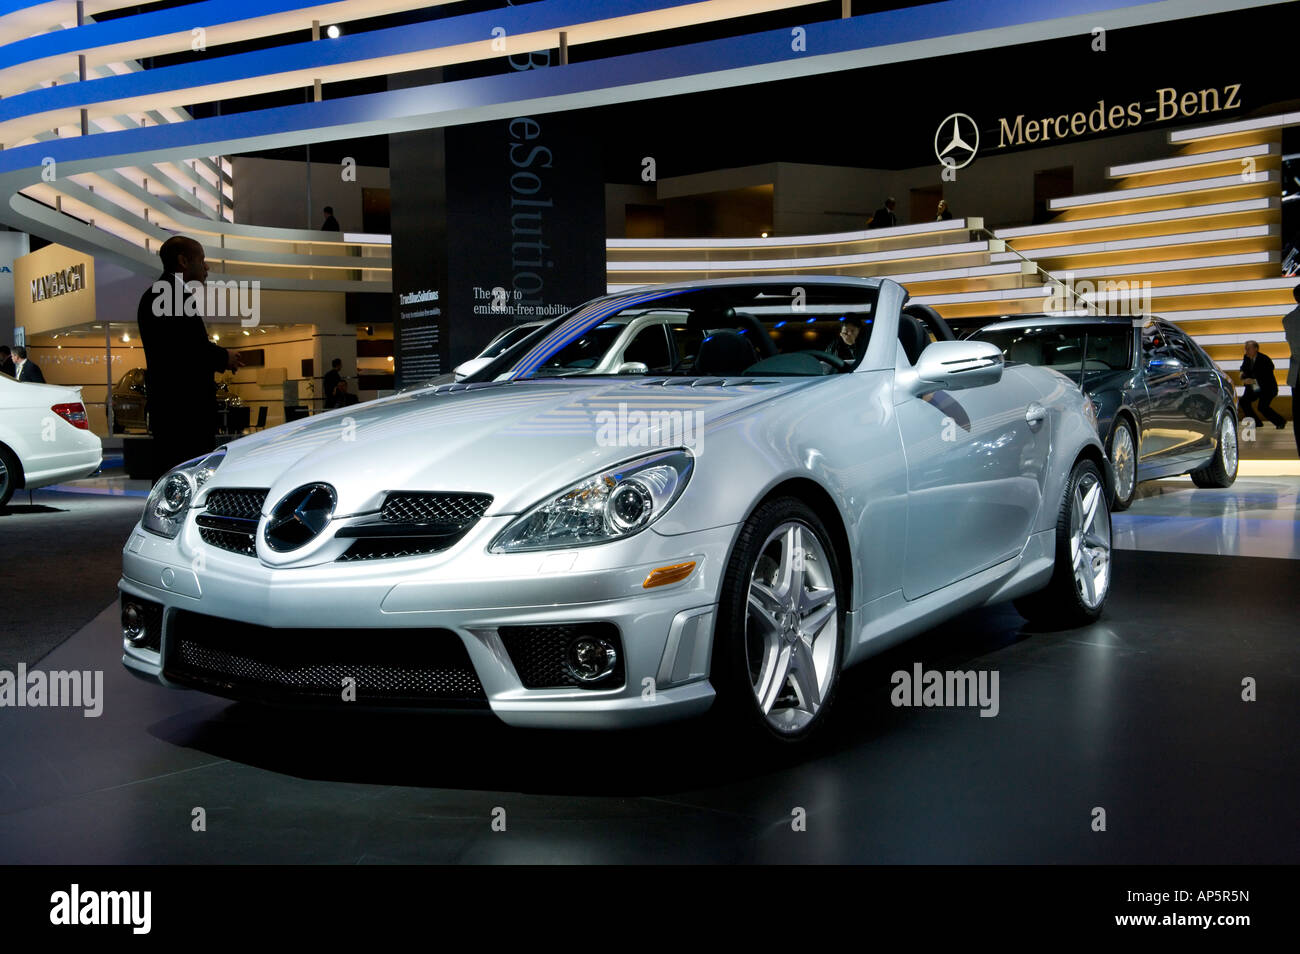 2009 Mercedes-Benz AMG 55 SLK at the 2008 North American International Auto Show in Detroit Michigan USA Stock Photo